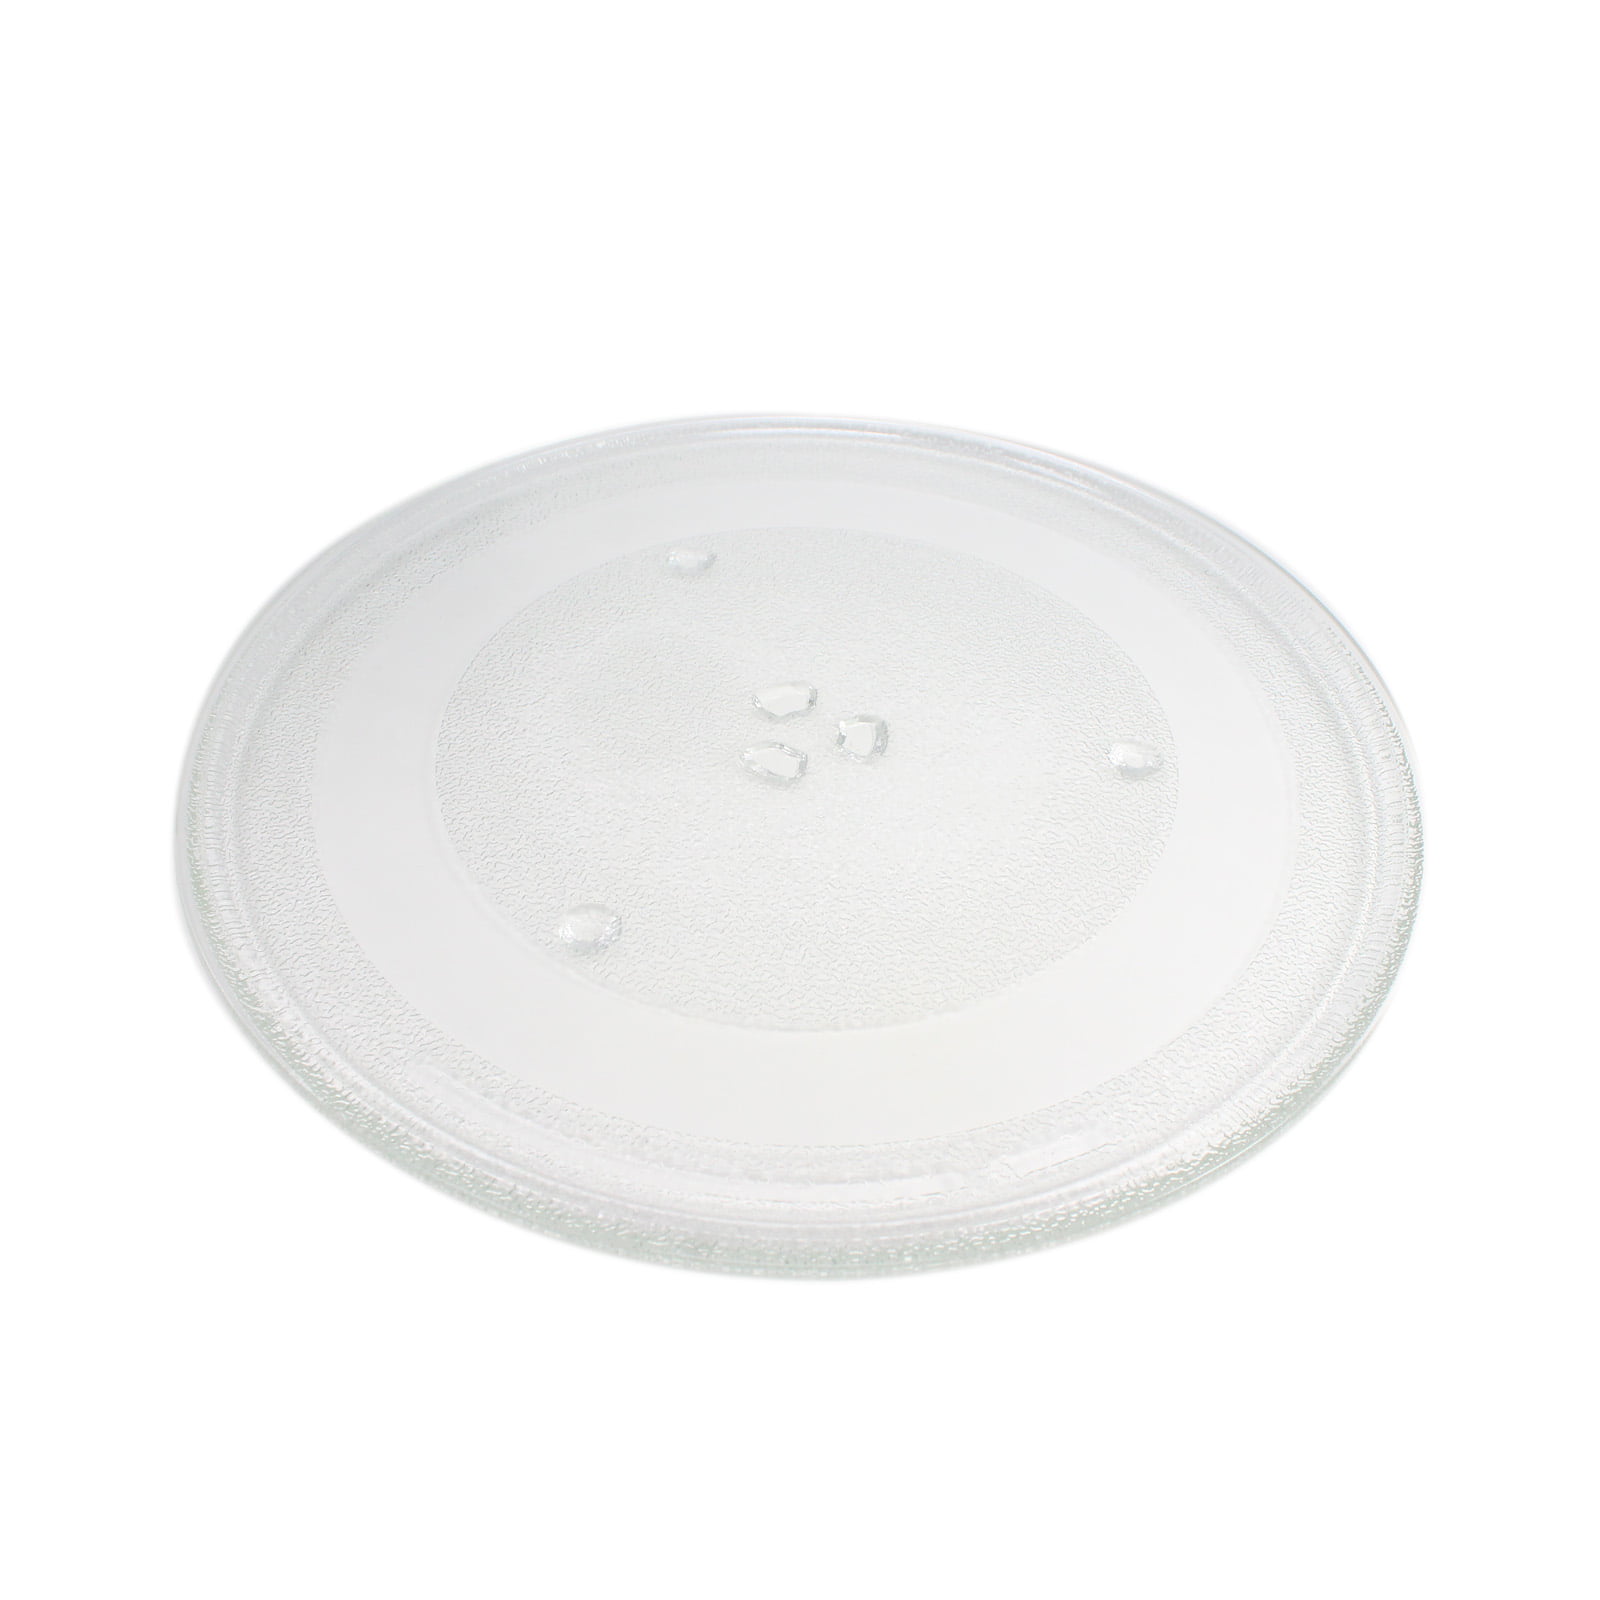 Sears Kenmore Microwave Glass Turntable Plate Tray 16 G006